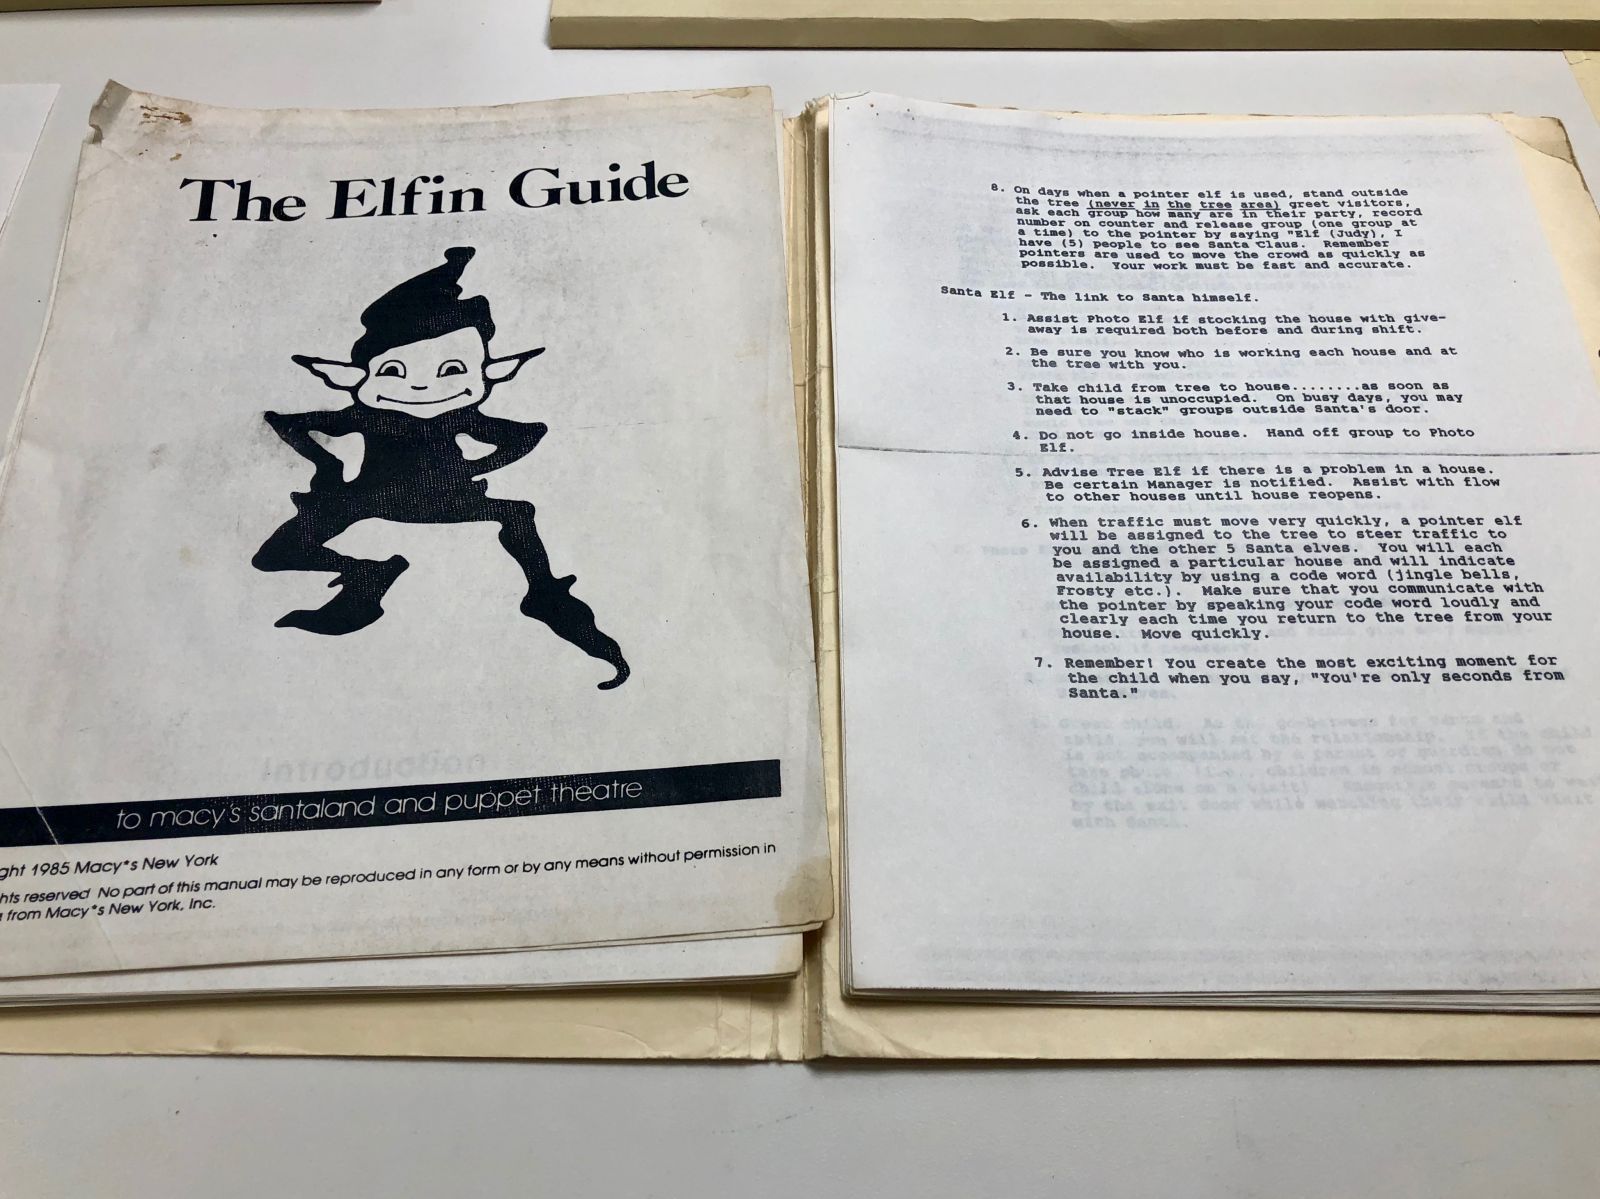 The guide that David Sedaris was given when he worked as an elf at Macy's.